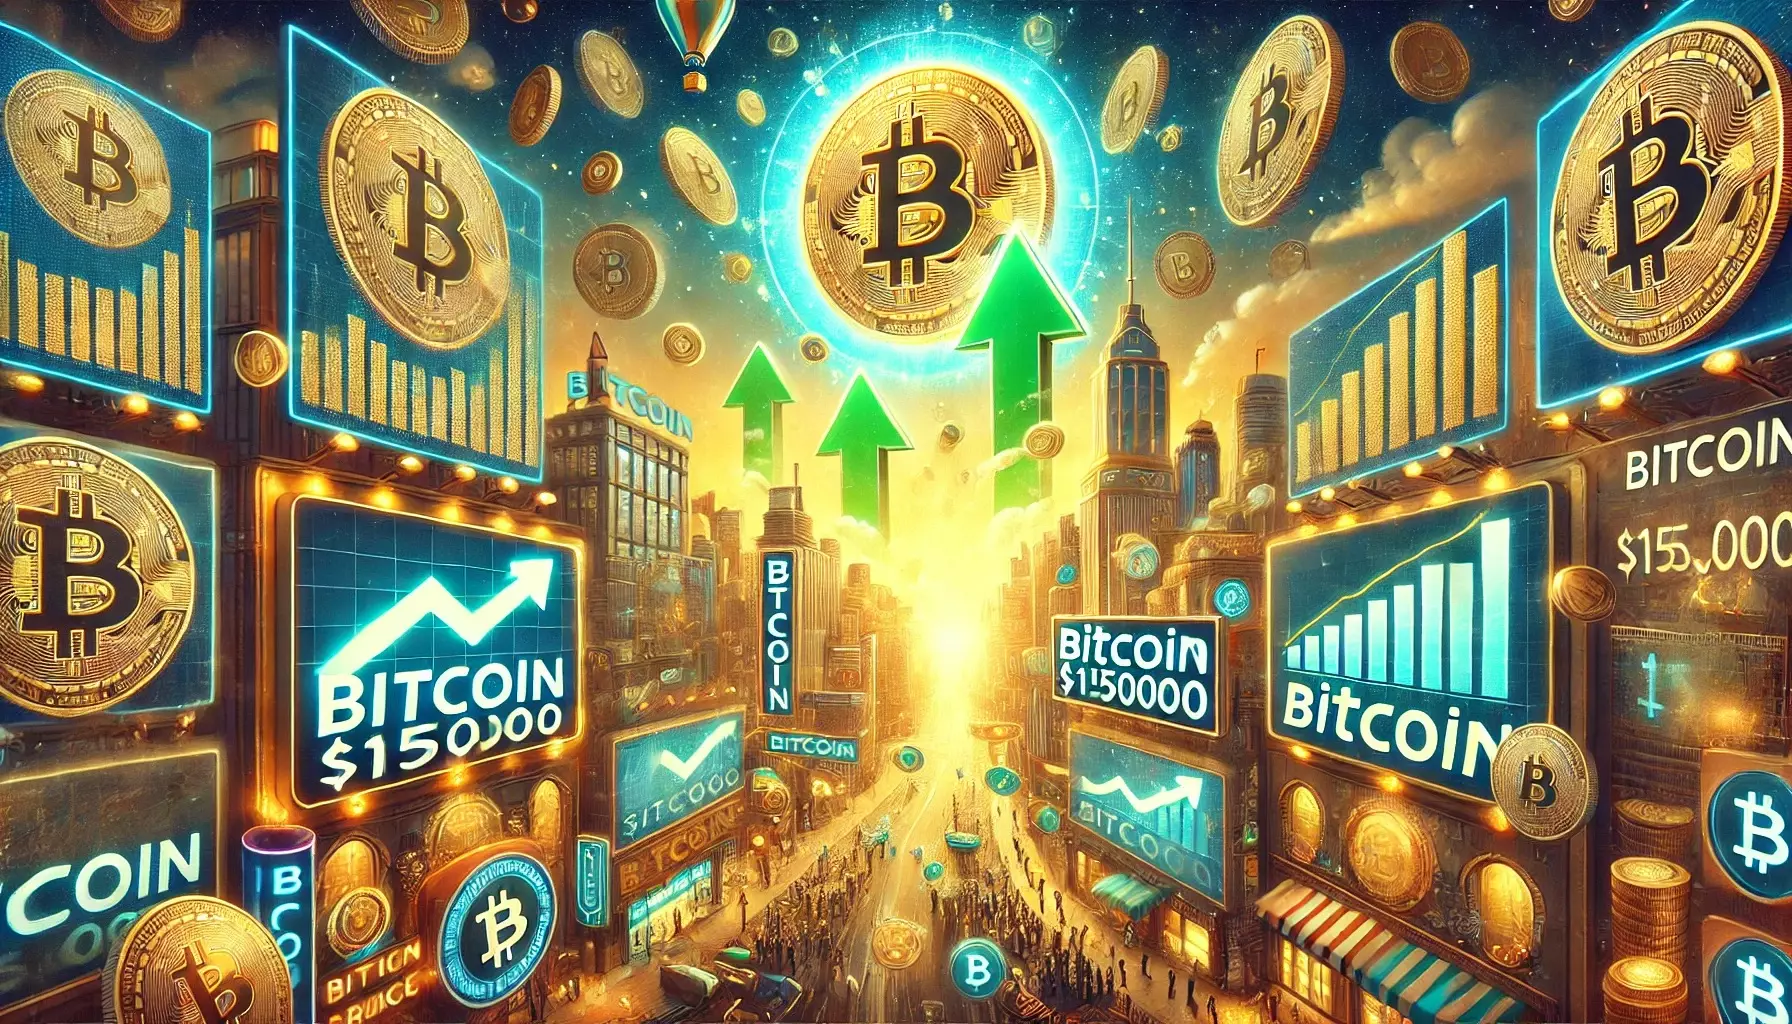 The Potential Upside of Bitcoin as Predicted by Tom Lee